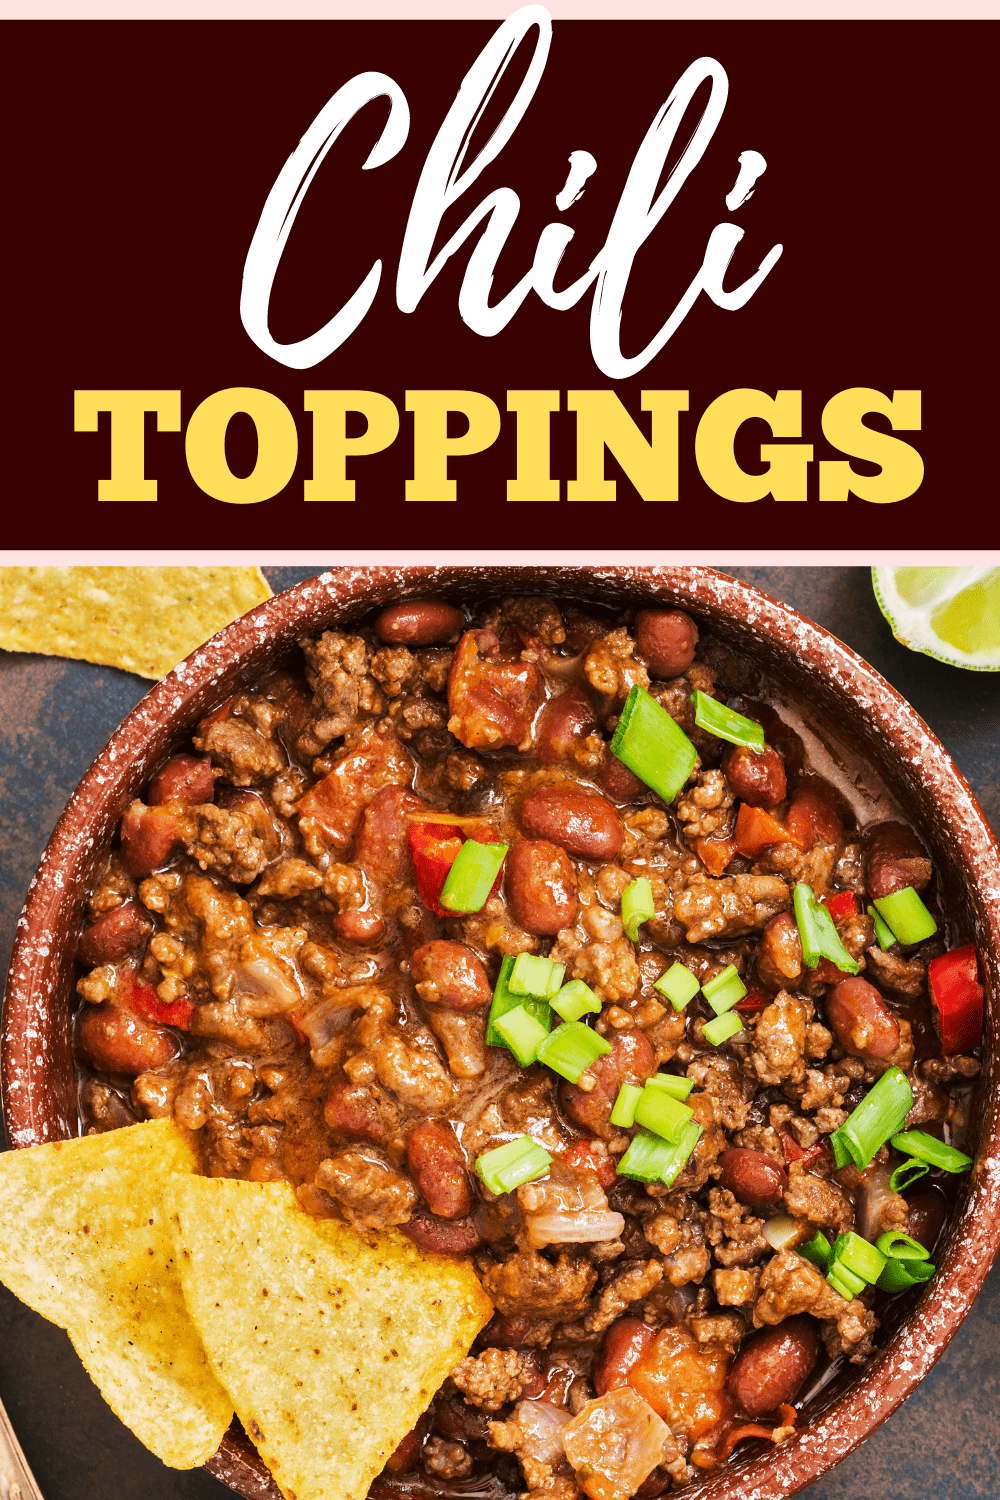 25-chili-toppings-for-your-chili-bar-insanely-good